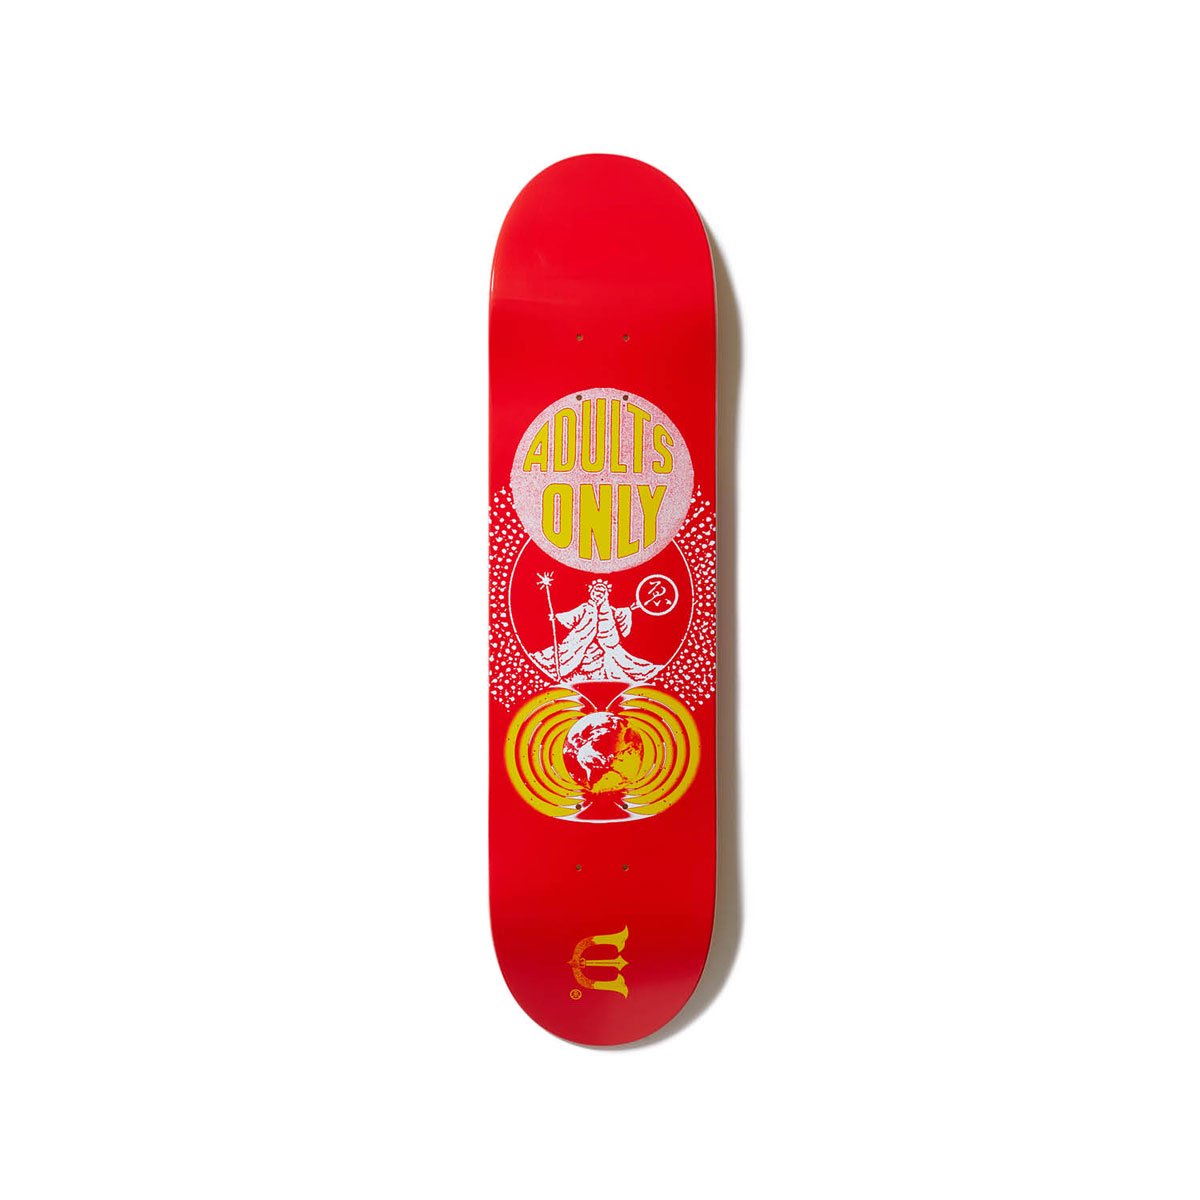 Evisen Adults Only Red 8.25" Skateboard Deck